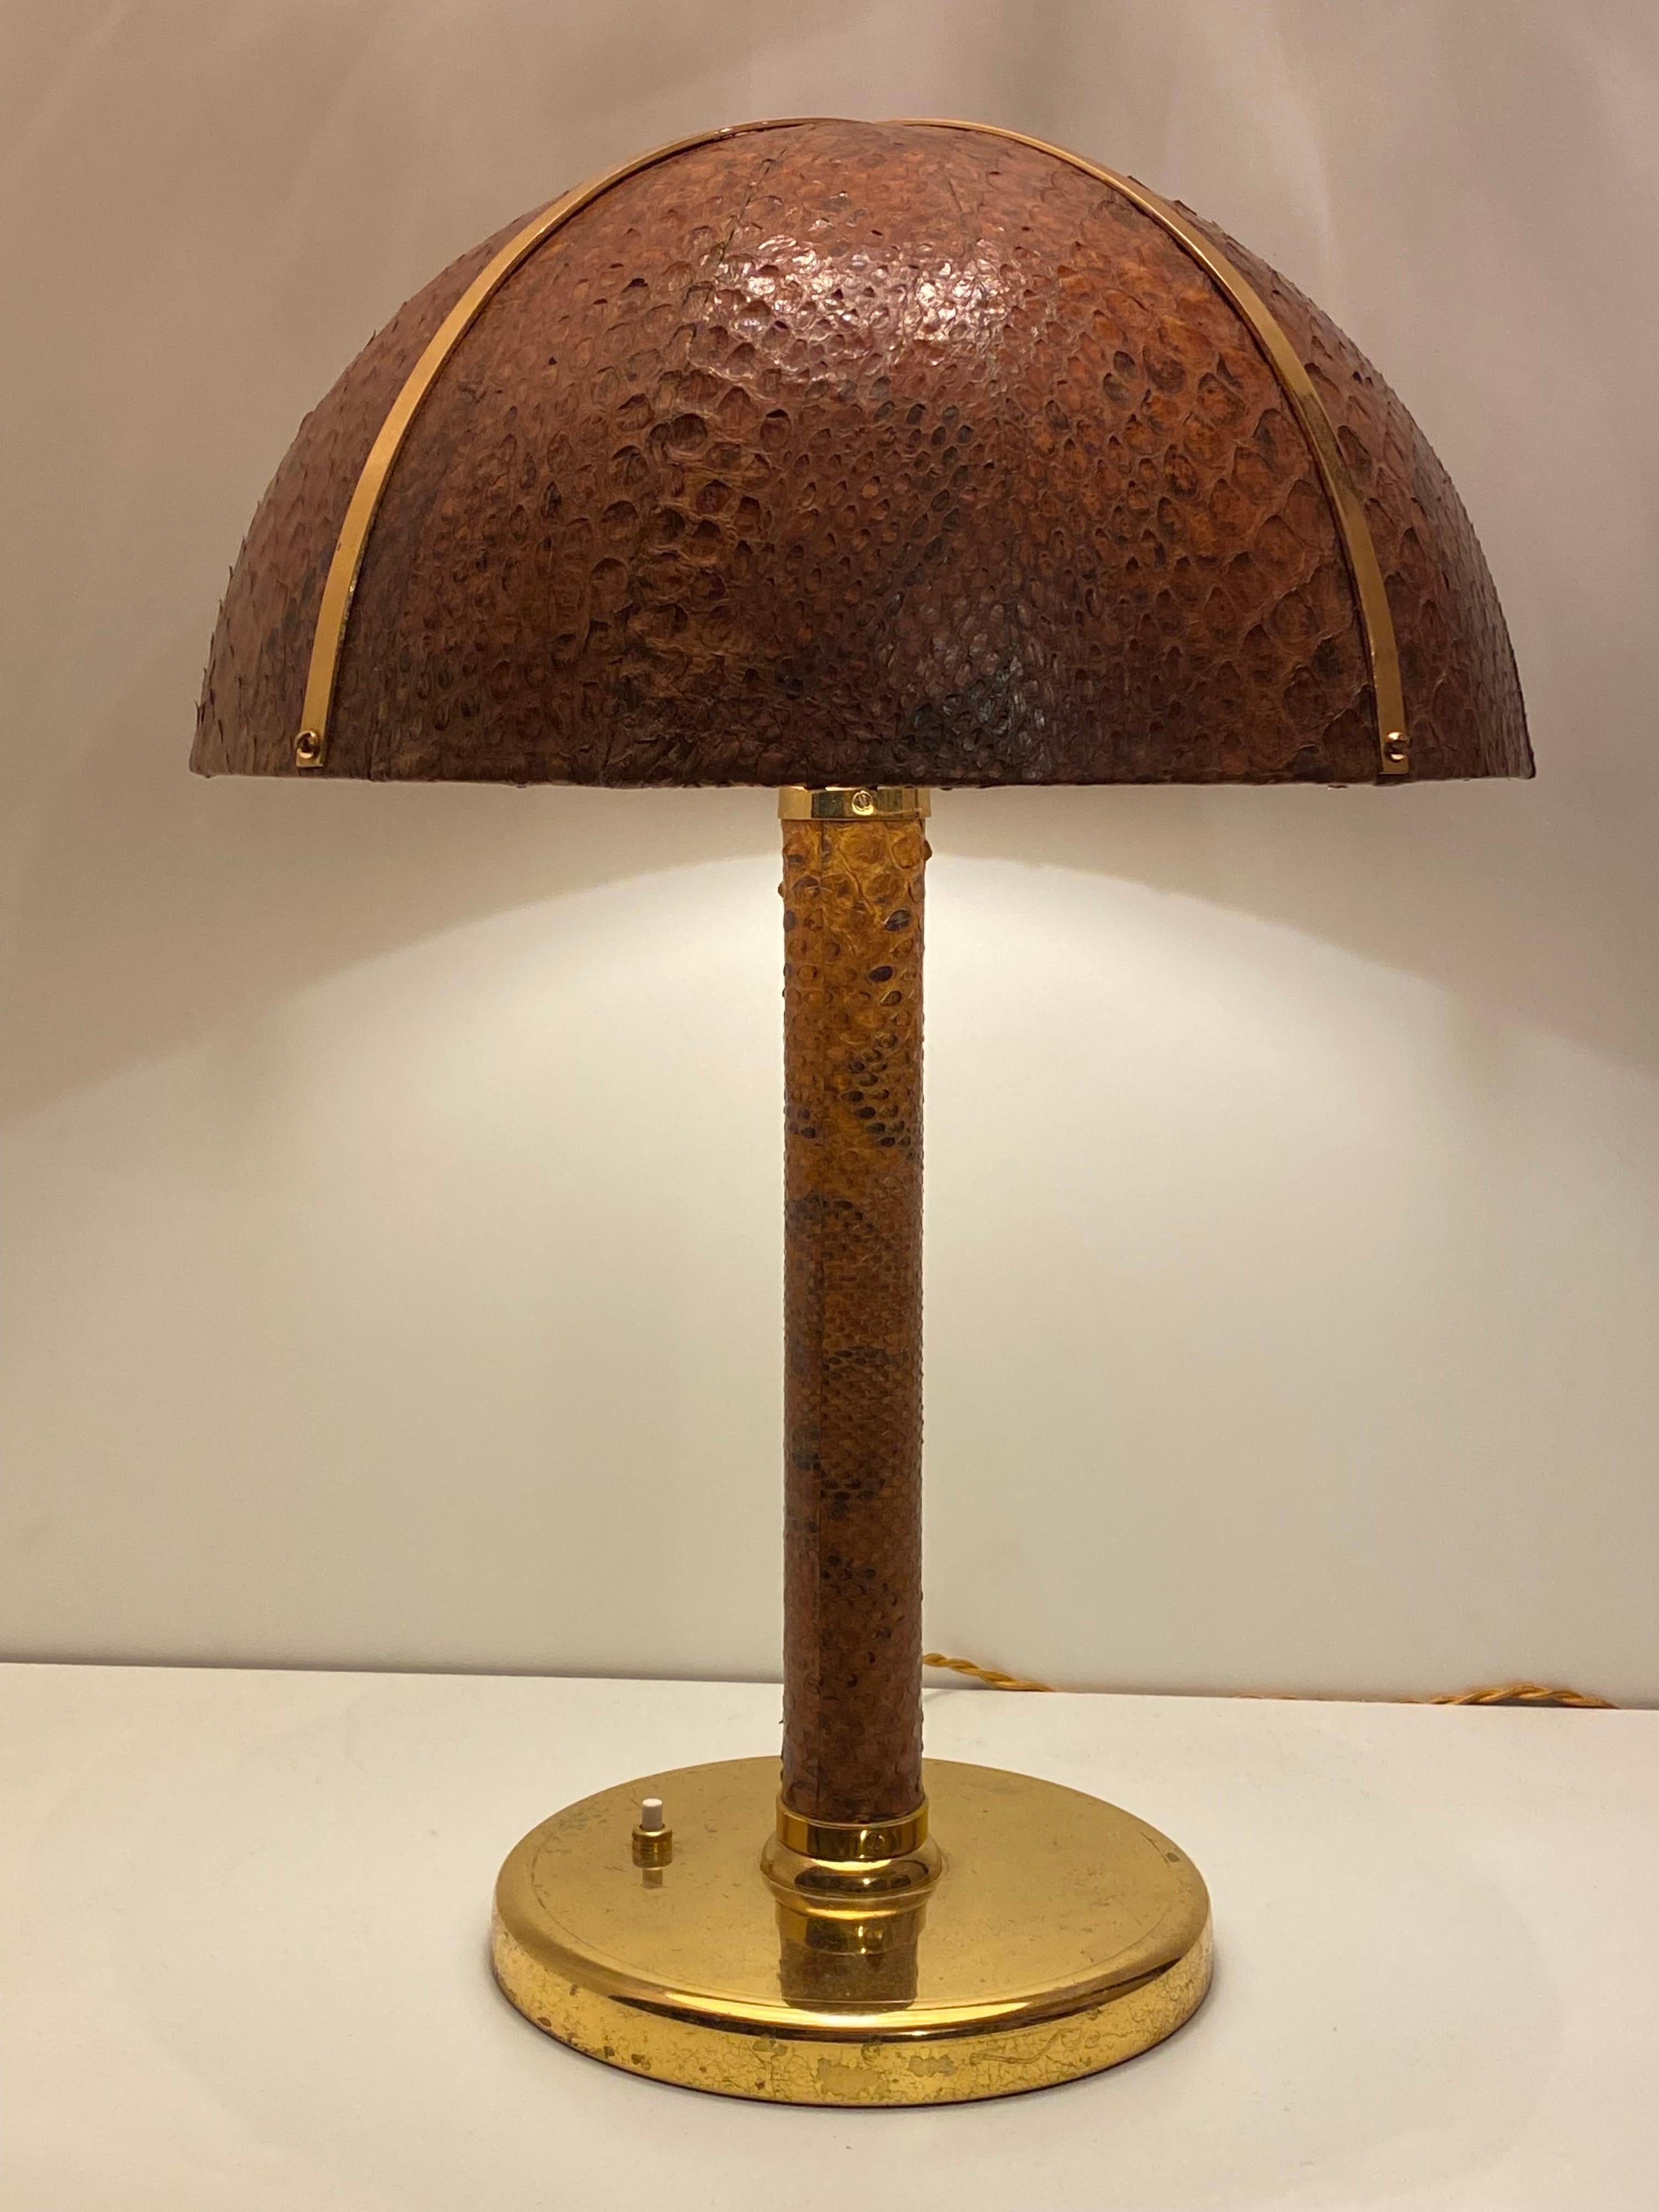 Python skin lamp attributed to Gabriella Crespi. Requires up to 40watt candelabra base bulb.